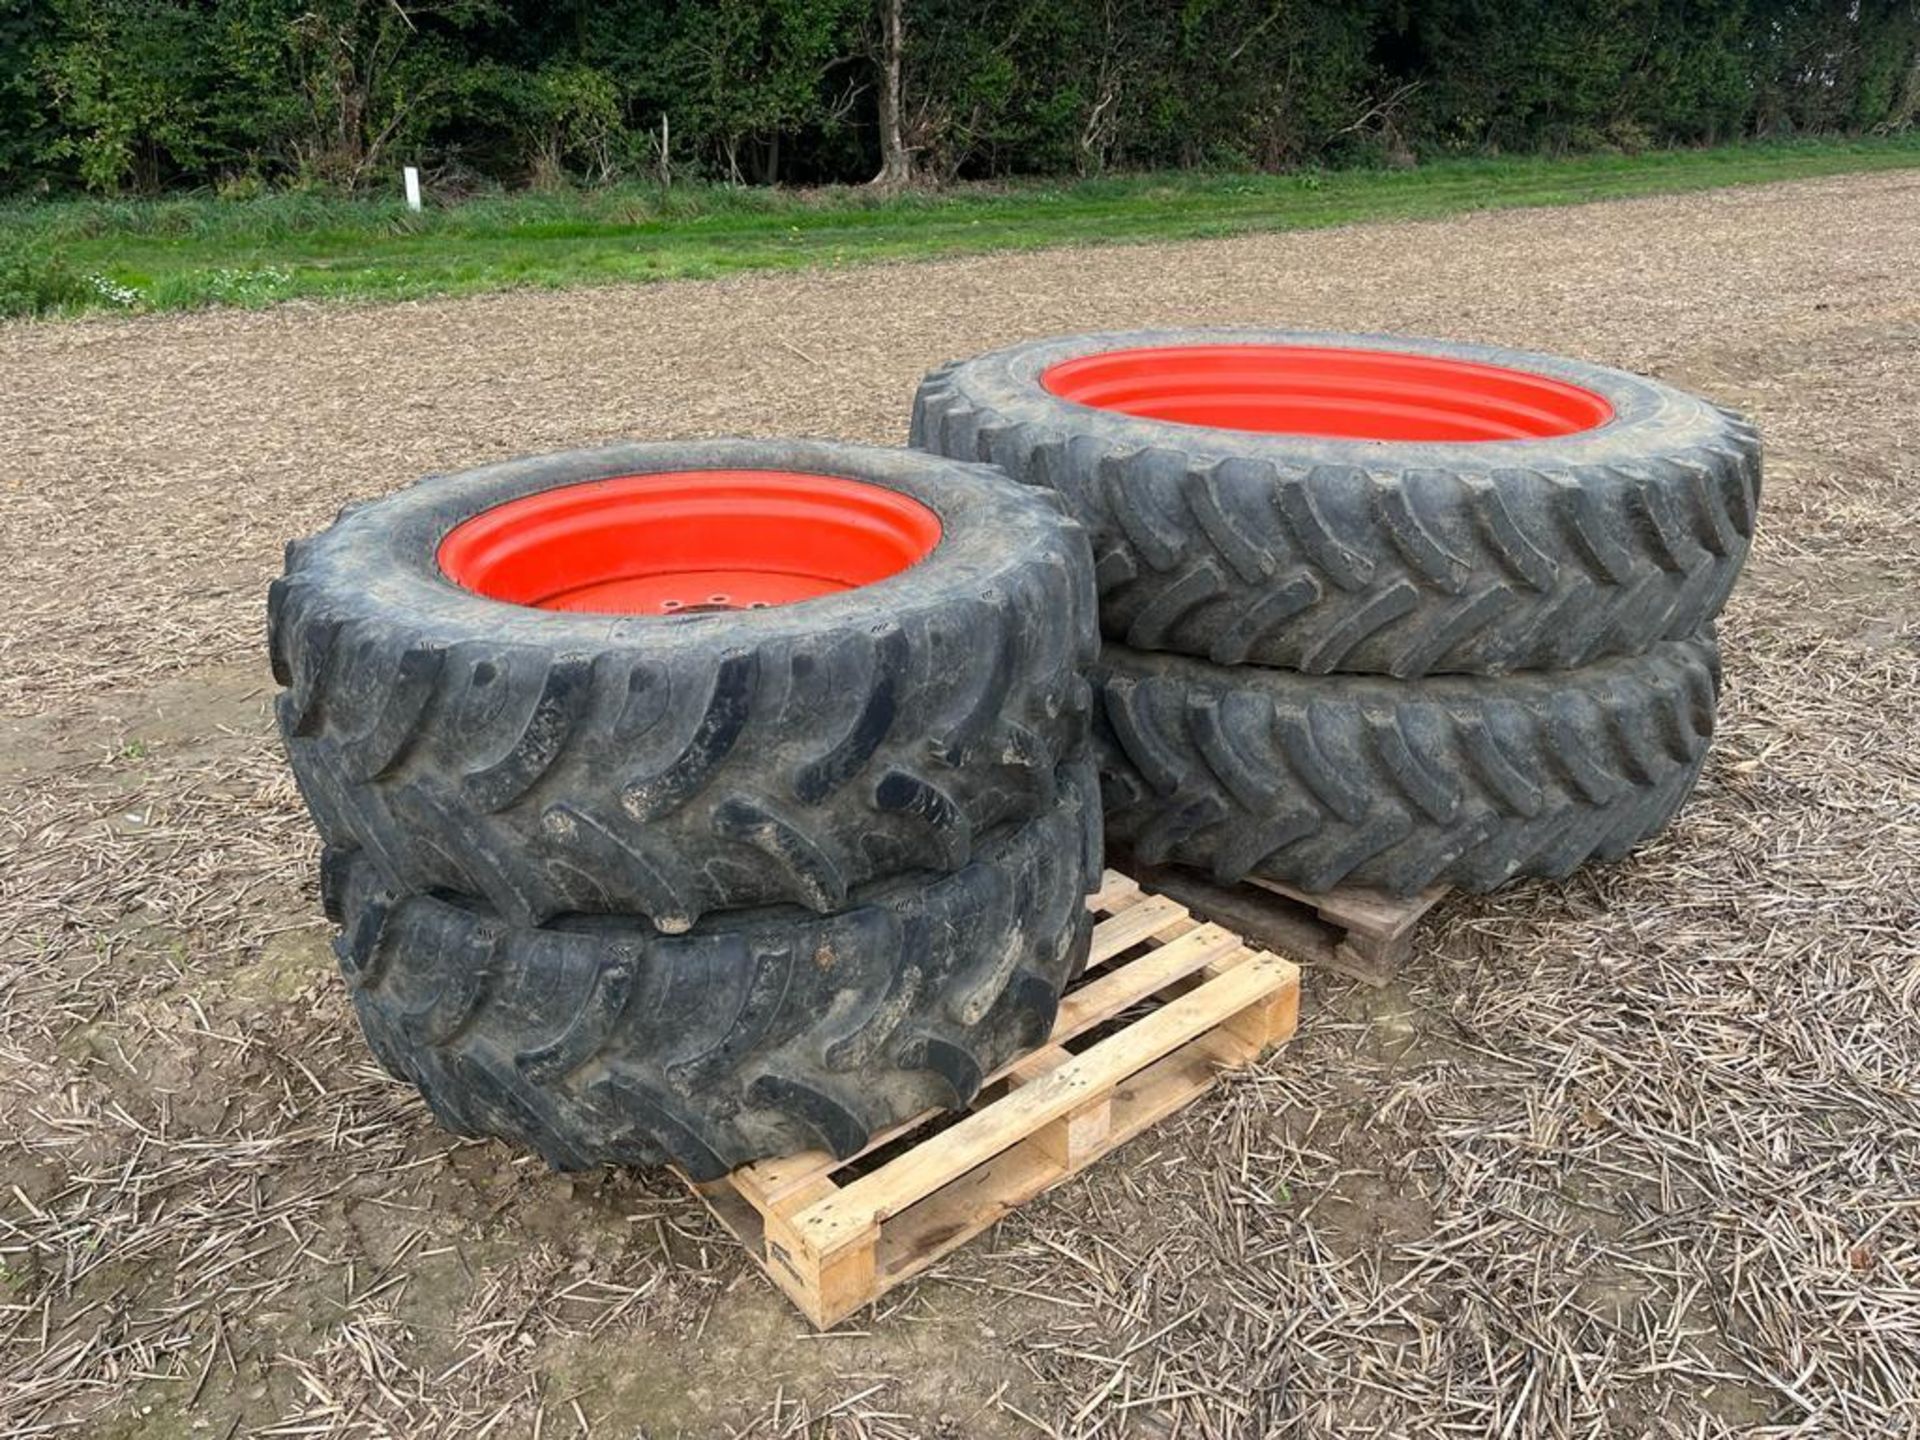 Kubota Row Crop Wheels and Tyres, Rear: 380/90 R46, Front 380/70 R28